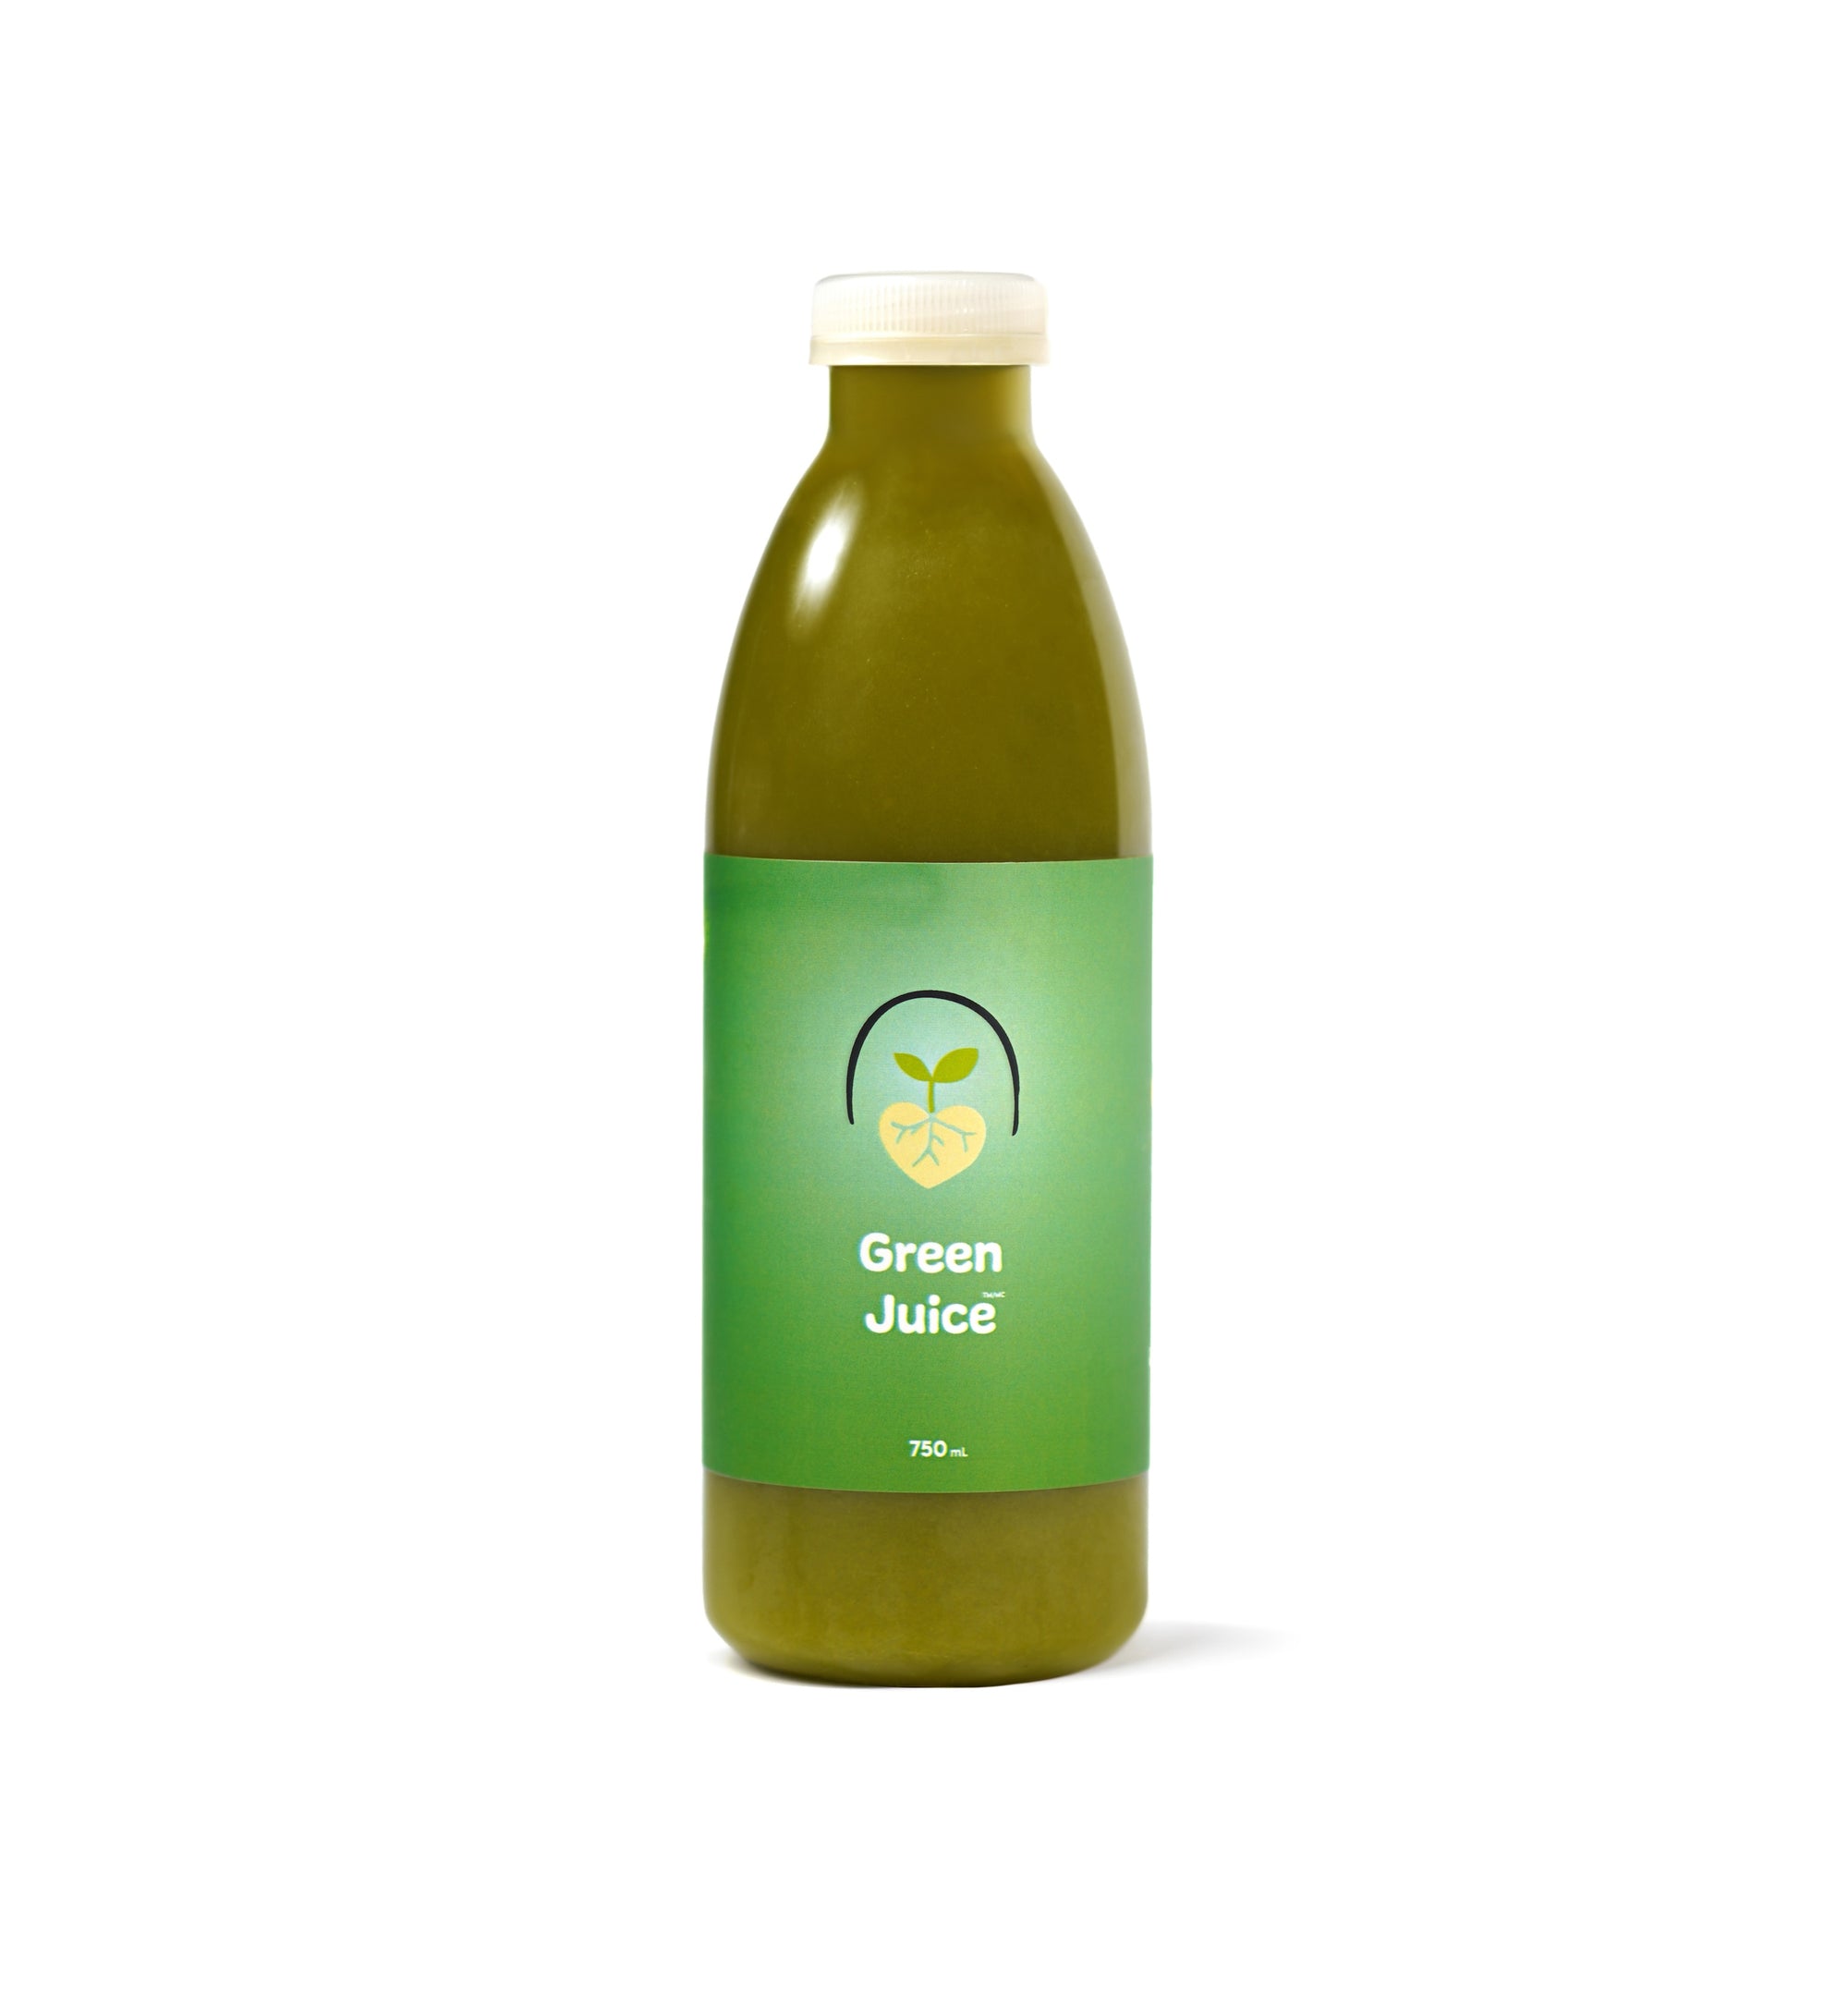 The Good Root Green Juice